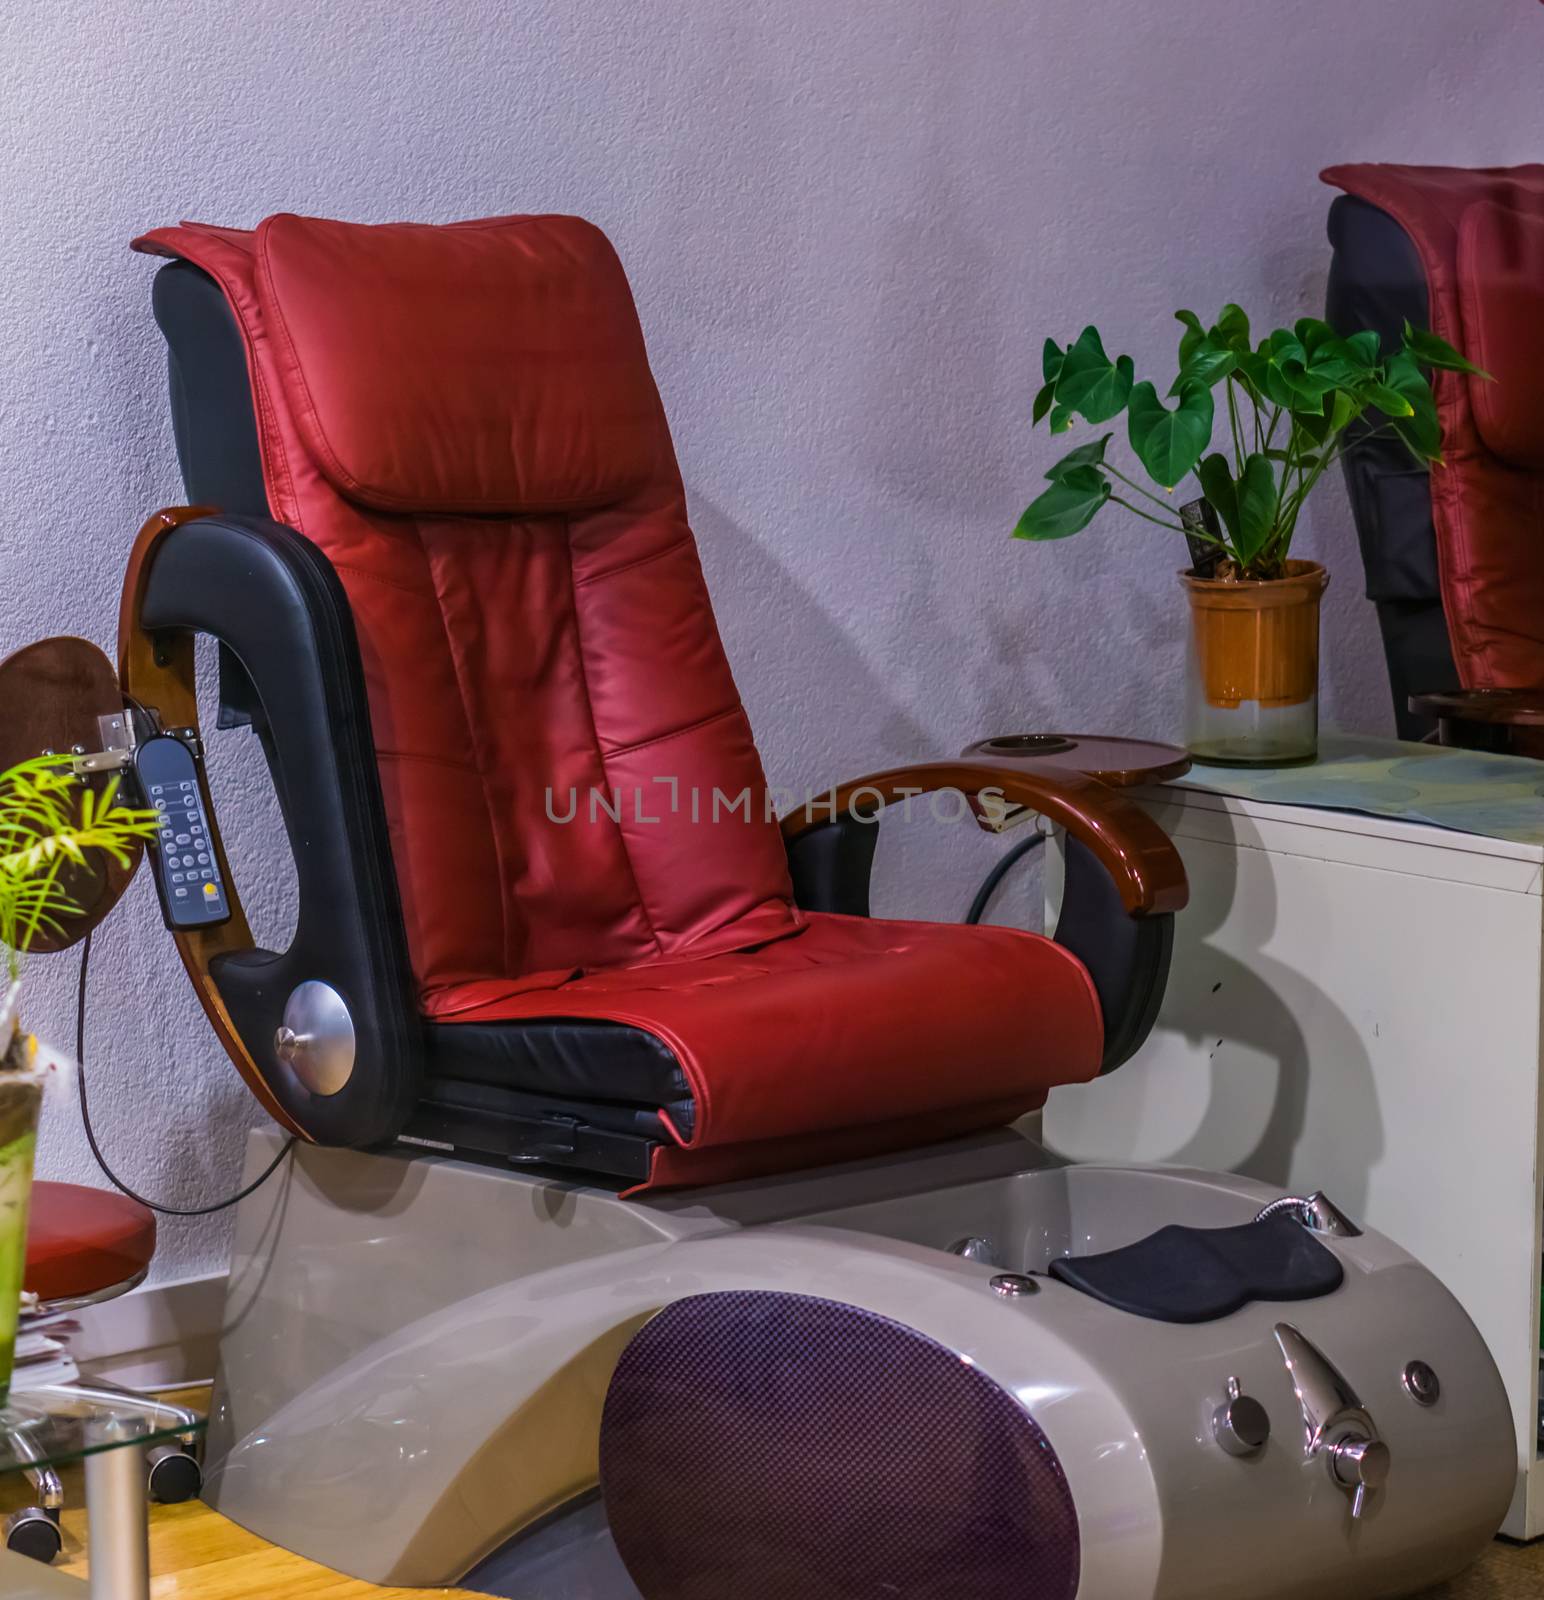 luxurious massage chair, therapeutic or wellness equipment, relaxation and healthcare by charlottebleijenberg